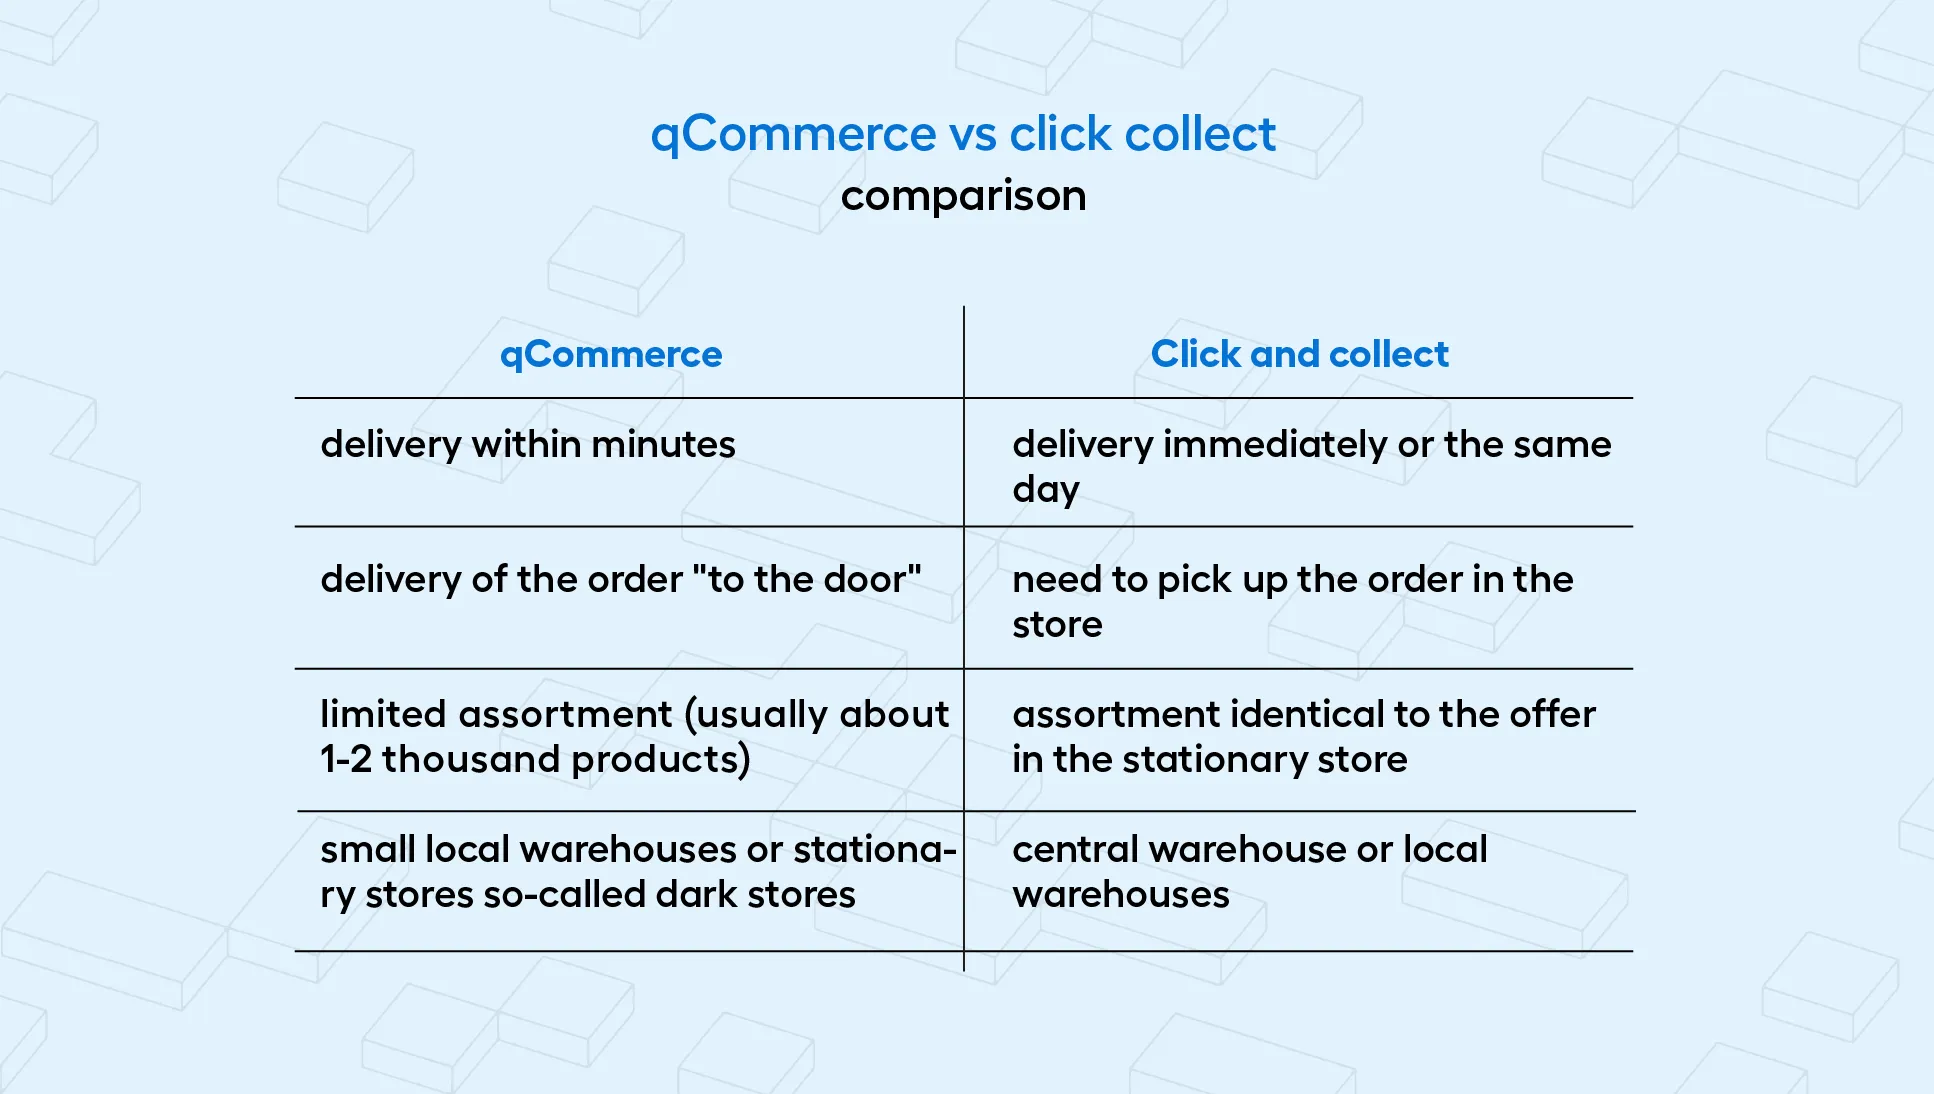 comparison between qCommerce and click&collect